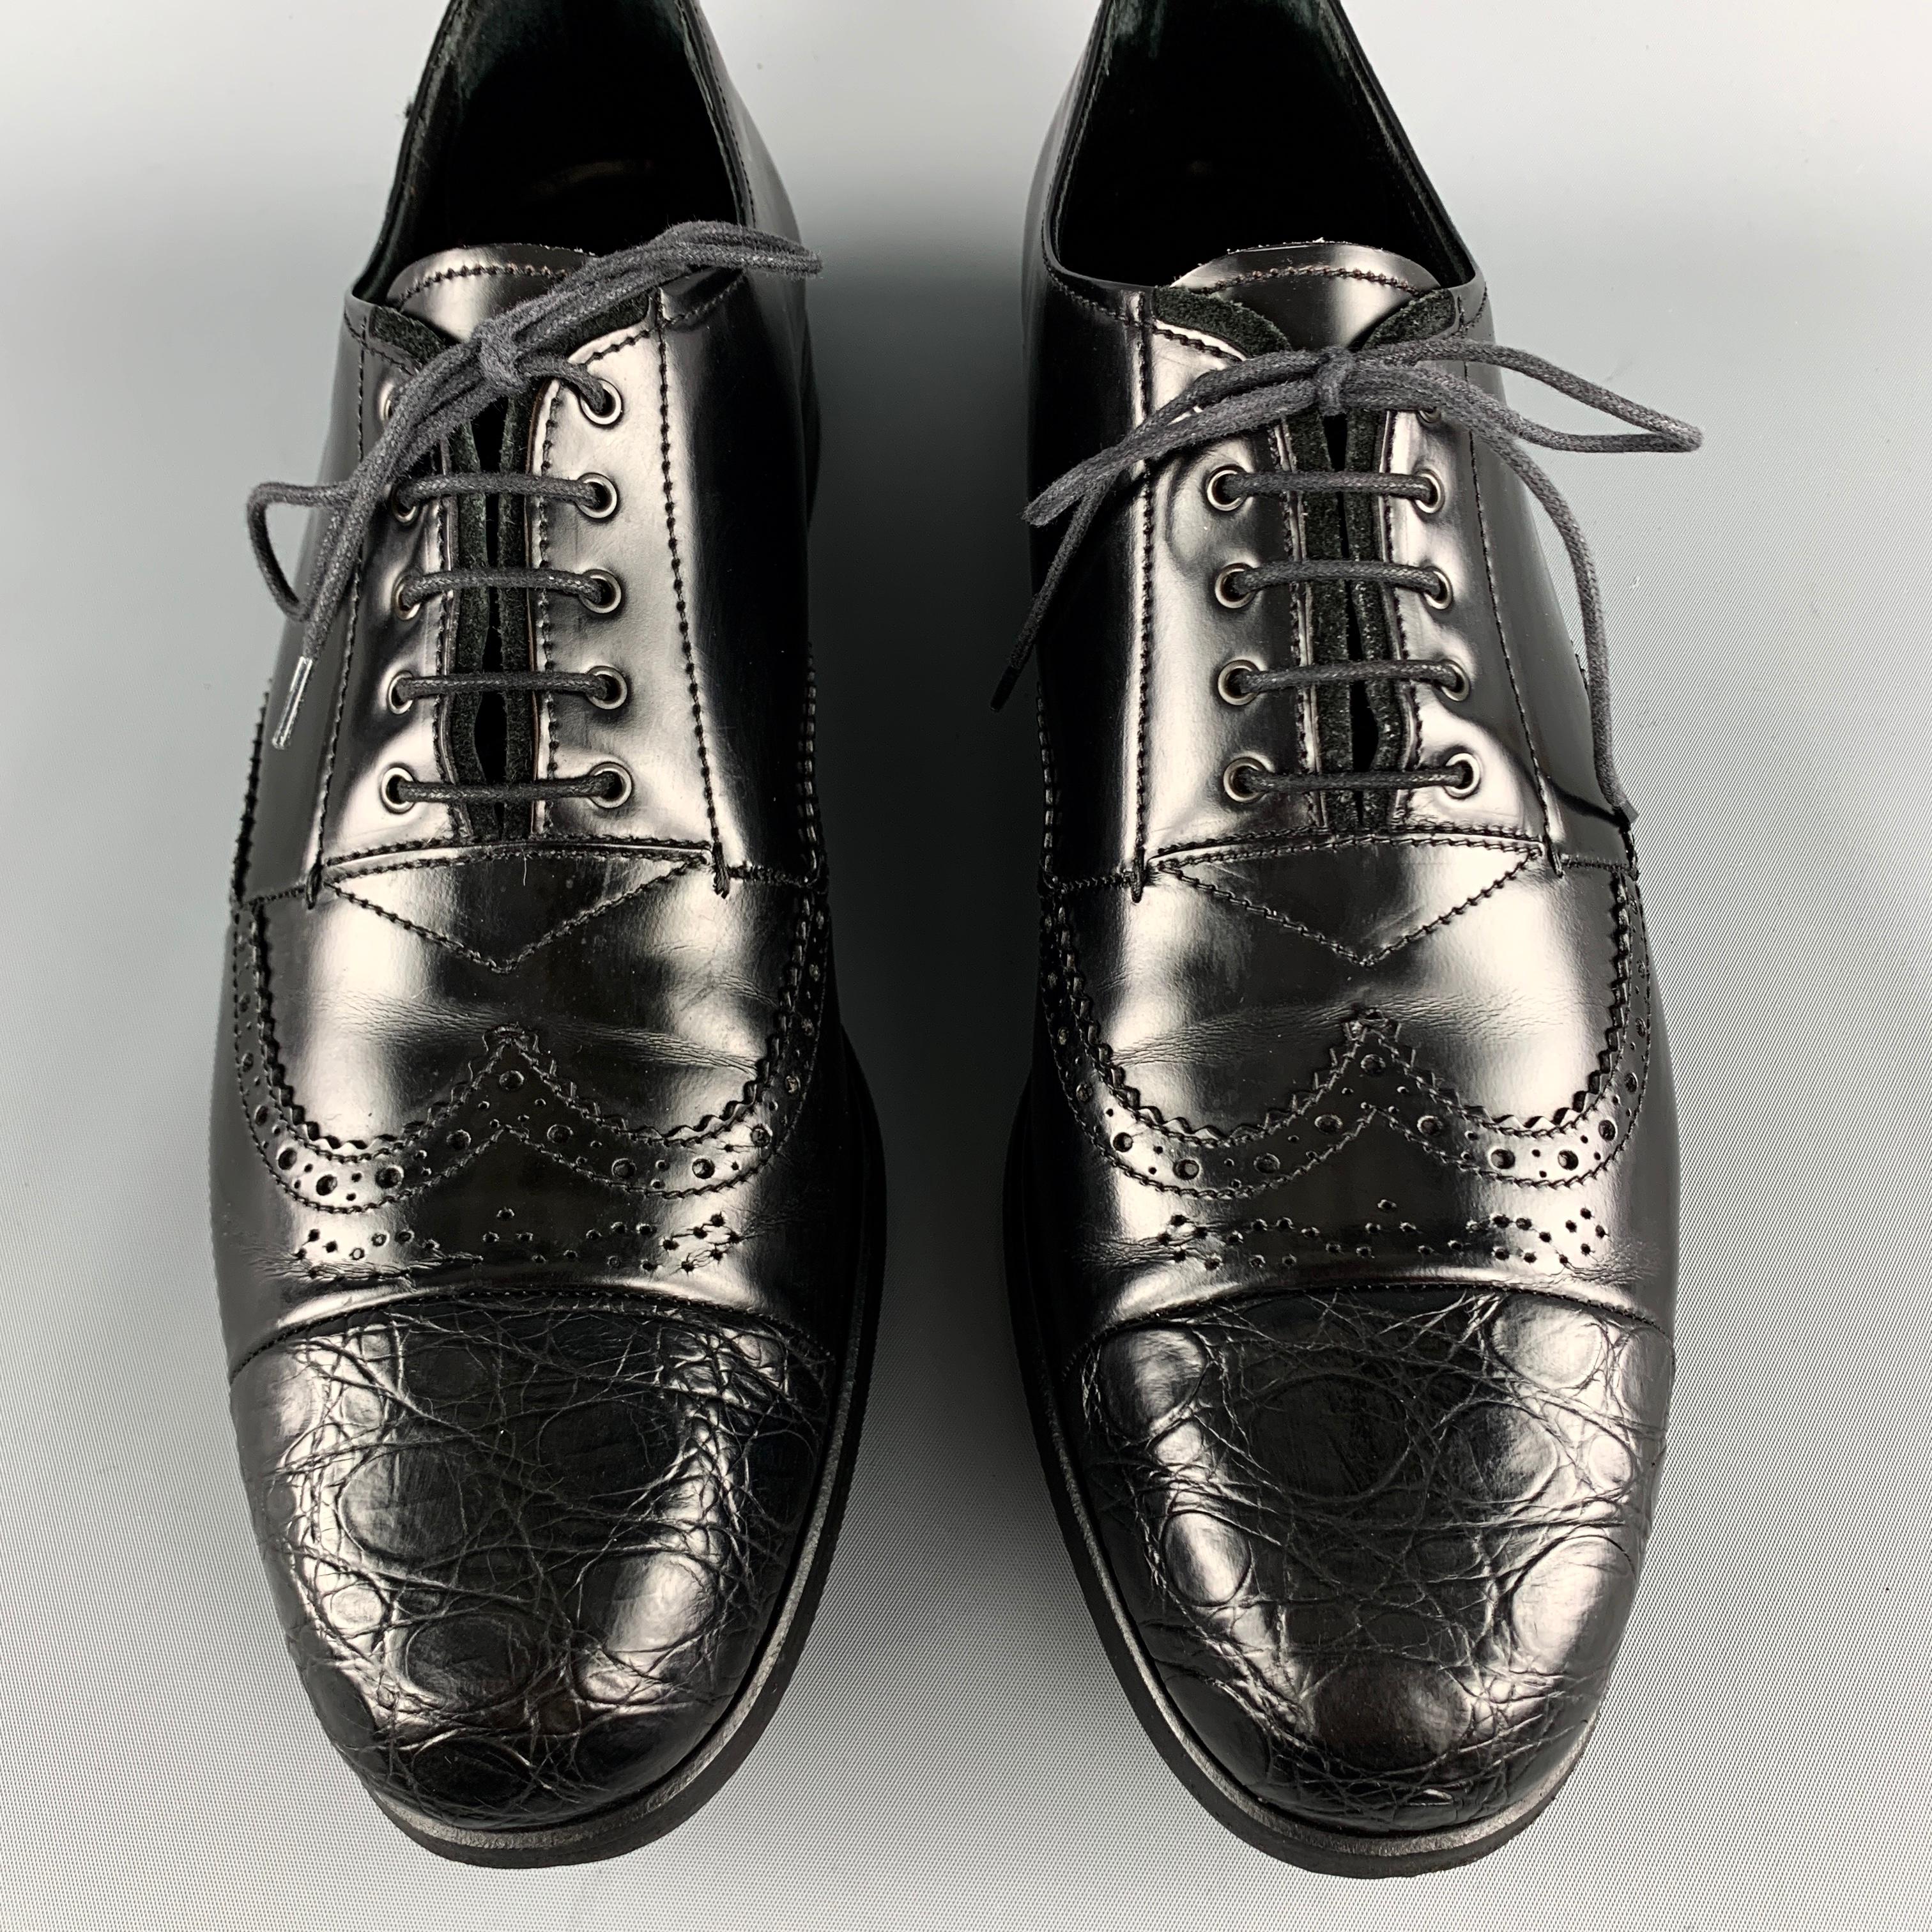 PRADA Size 9 Black Perforated Leather Wingtip Textured Cap Toe Lace Up Shoes 1